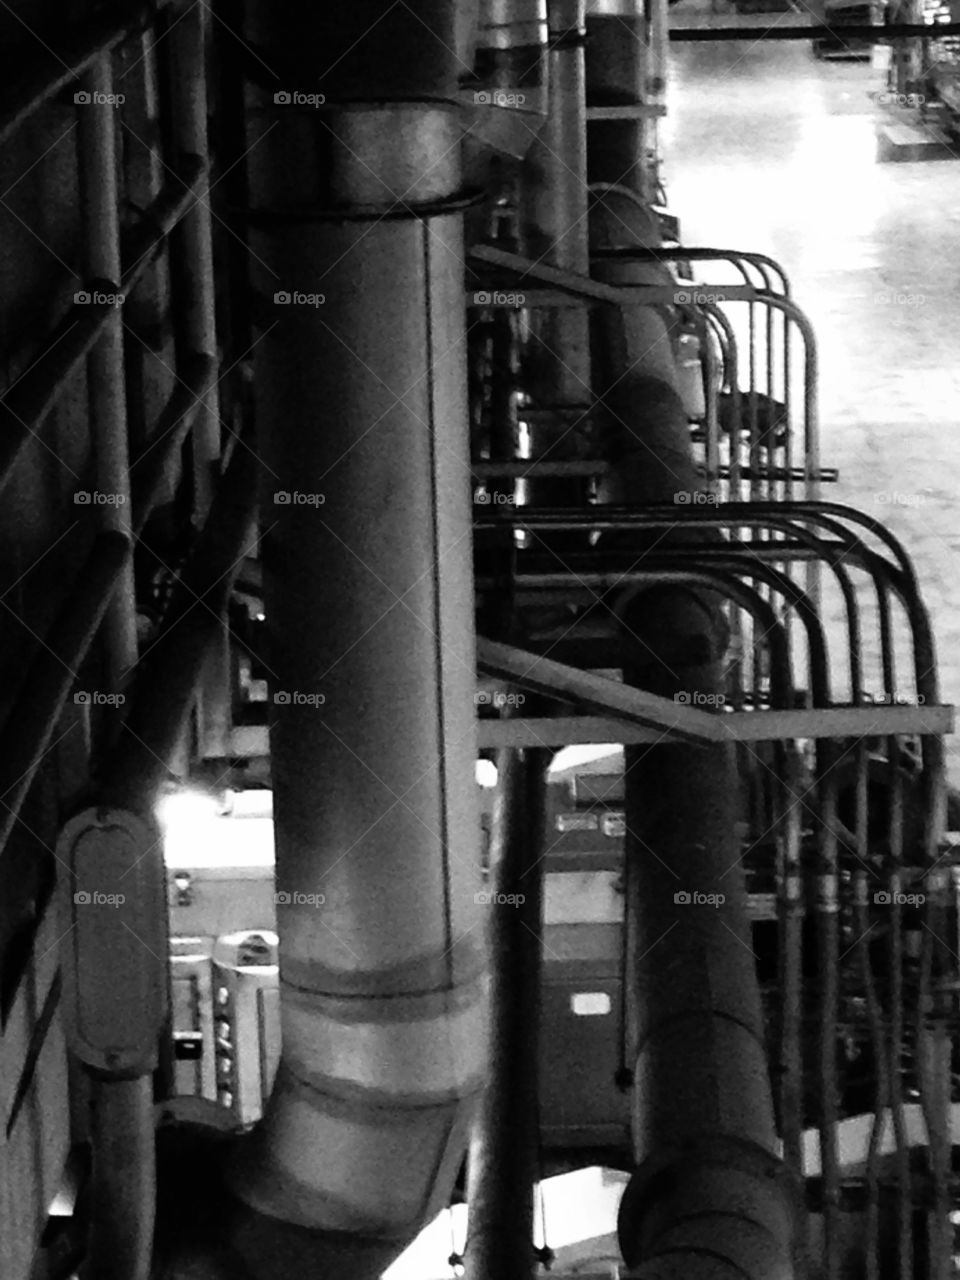 Industrial . Factory, pipes